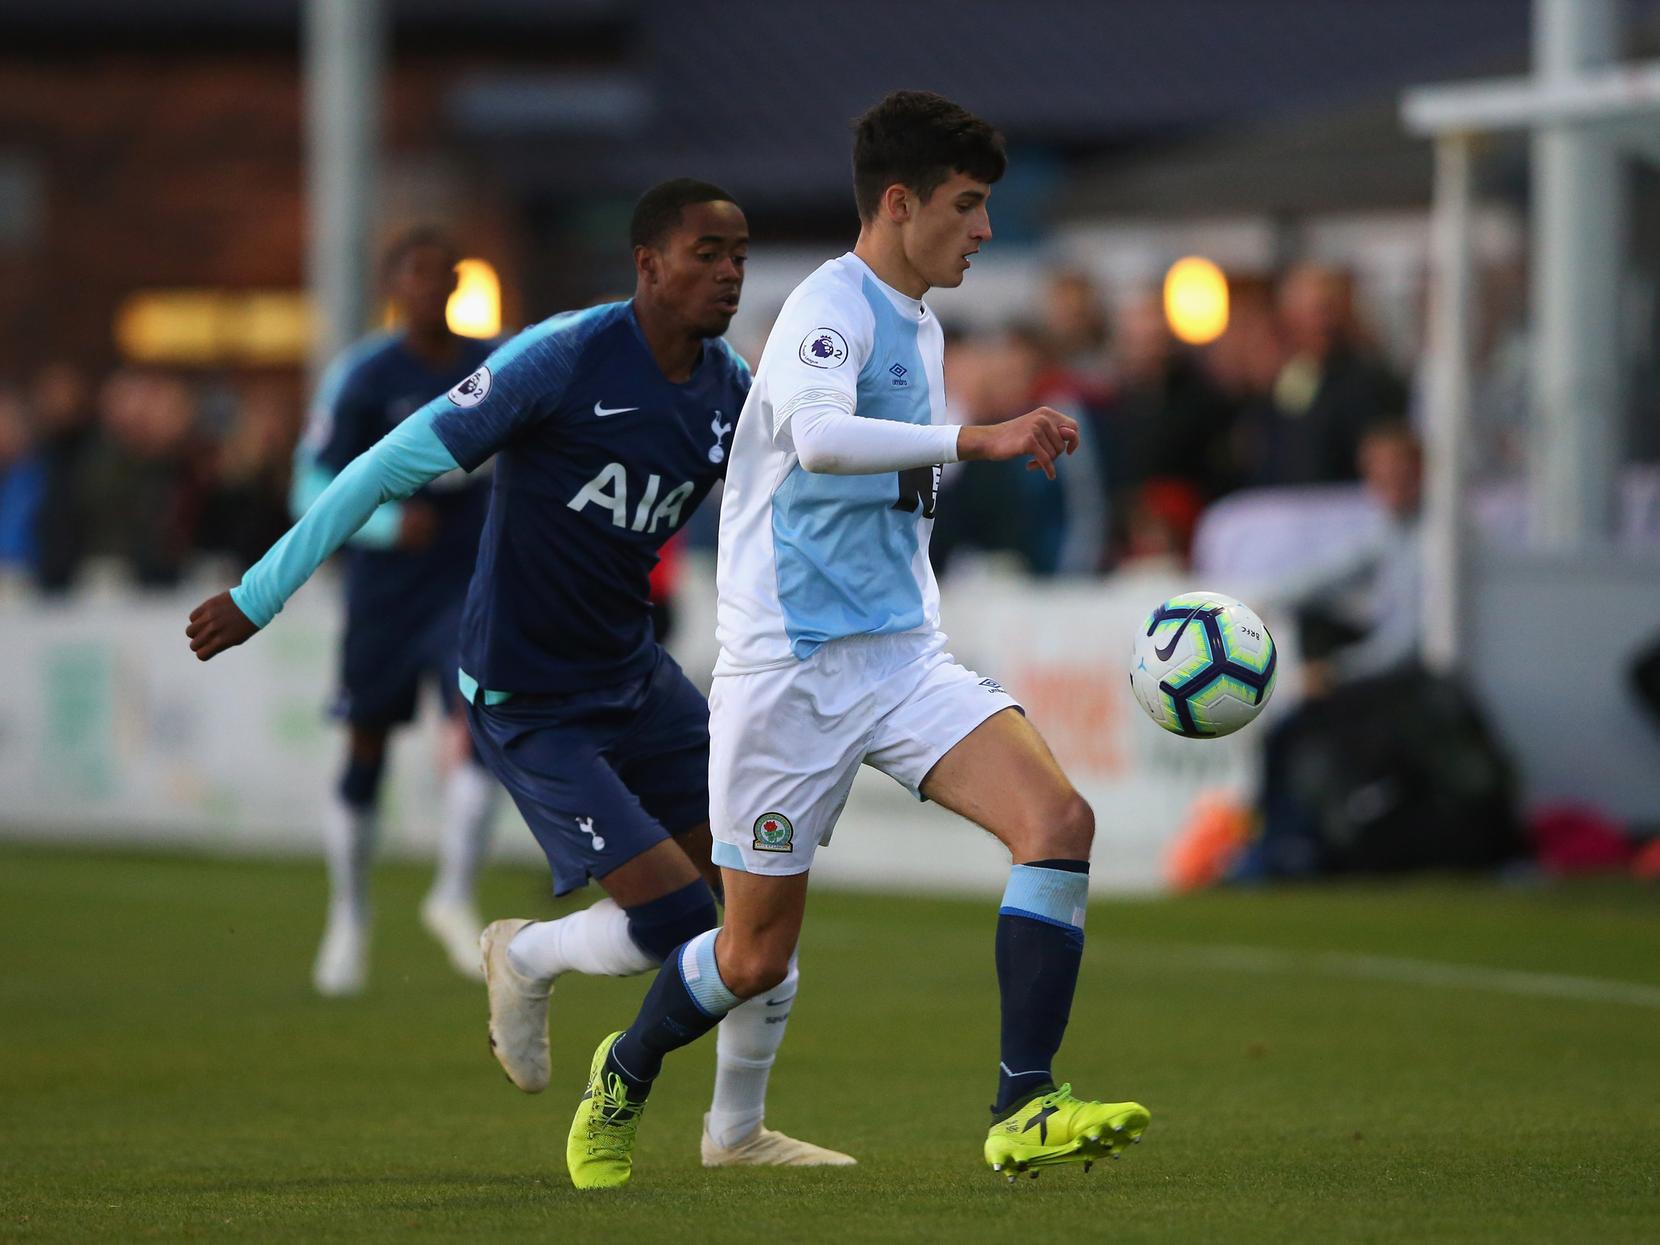 Blackburn boss Tony Mowbray has praised starlet John Buckley for thriving in the Championship despite his strikingly slight frame, and has tipped him to go from strength to strength as he continues to develop. (Lancashire Telegraph)